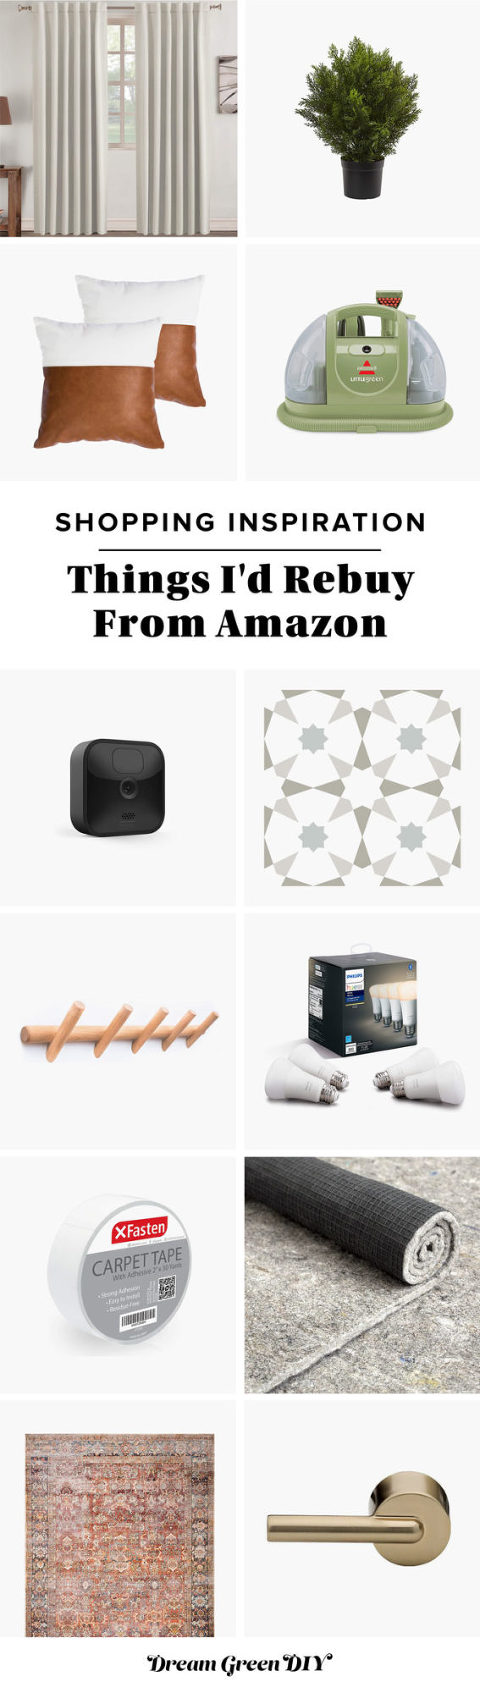 12 Things I'd Rebuy From Amazon